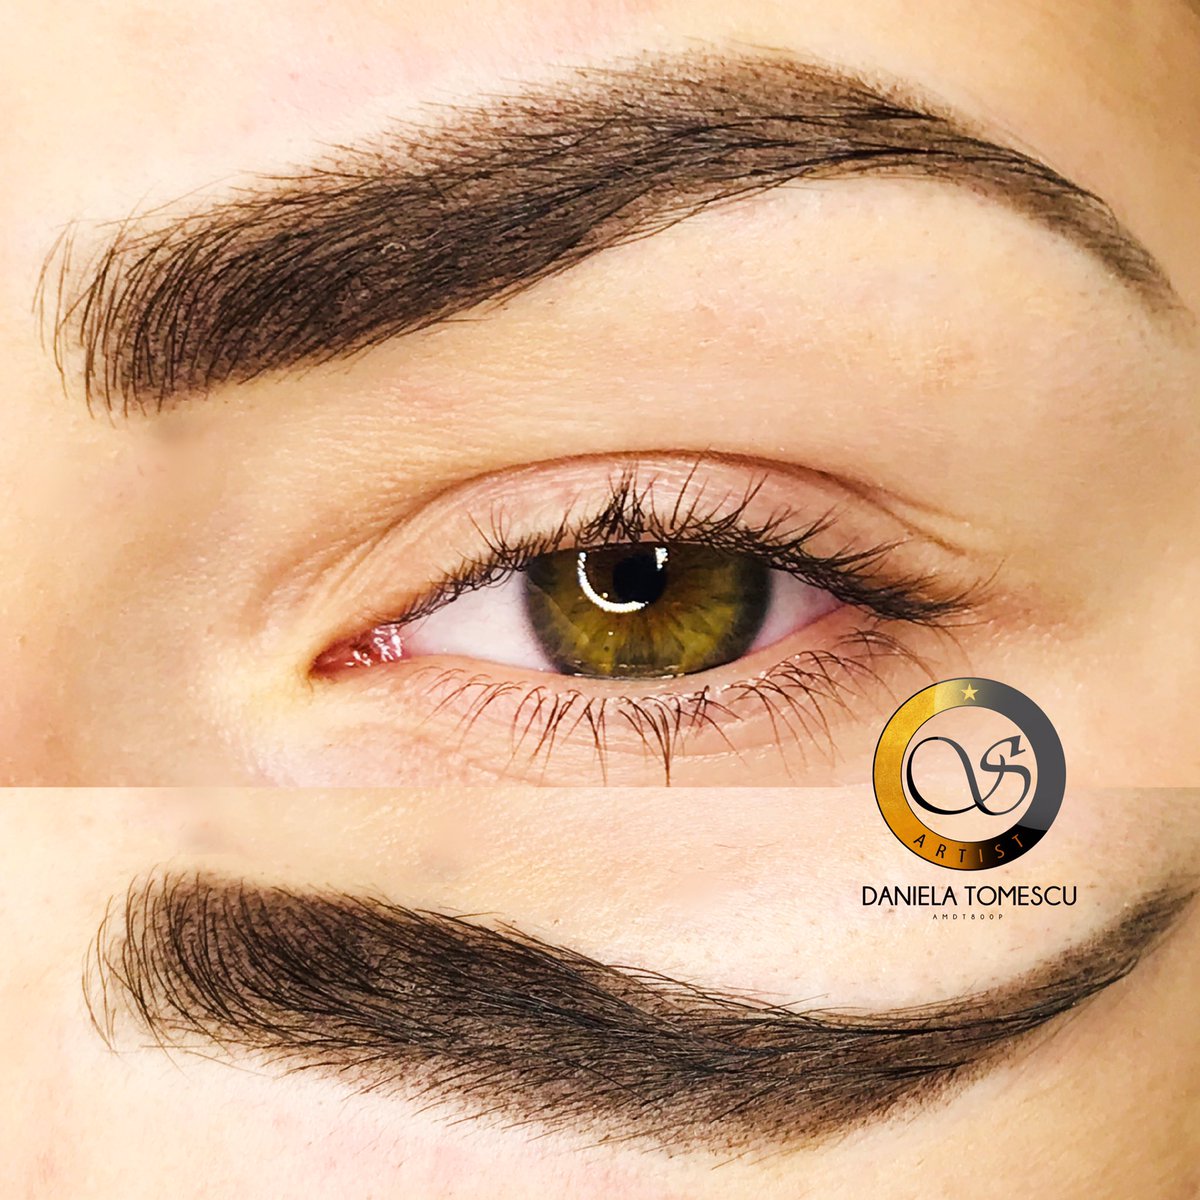 Permanent Make Up Kosmetikstudio Tomescu Pa Twitter Ombre New Trend Augenbrauen Ombrebrowns Pmu Tattoo Tattoos Augenbrauen Wurzburg Wuerzburg Kosmetikstudiowurzburg T Co Xjhwb8uazl